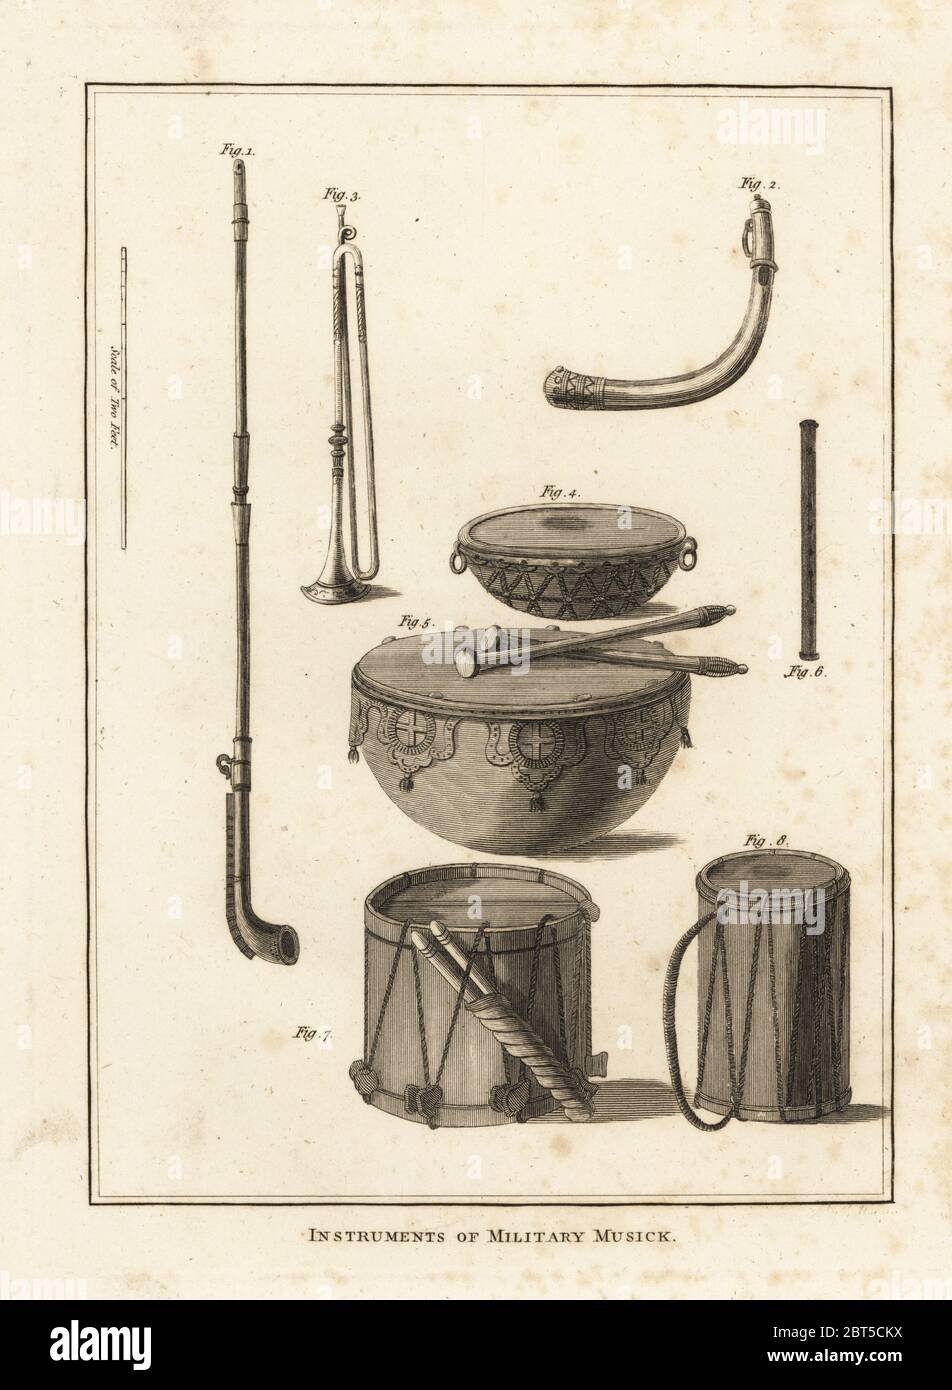 Military musical instruments: trumpet, horn, fife, kettle drum, side drum. Instruments of military musick. Copperplate engraving from Francis Grose's Military Antiquities respecting a History of the English Army, Stockdale, London, 1812. Stock Photo